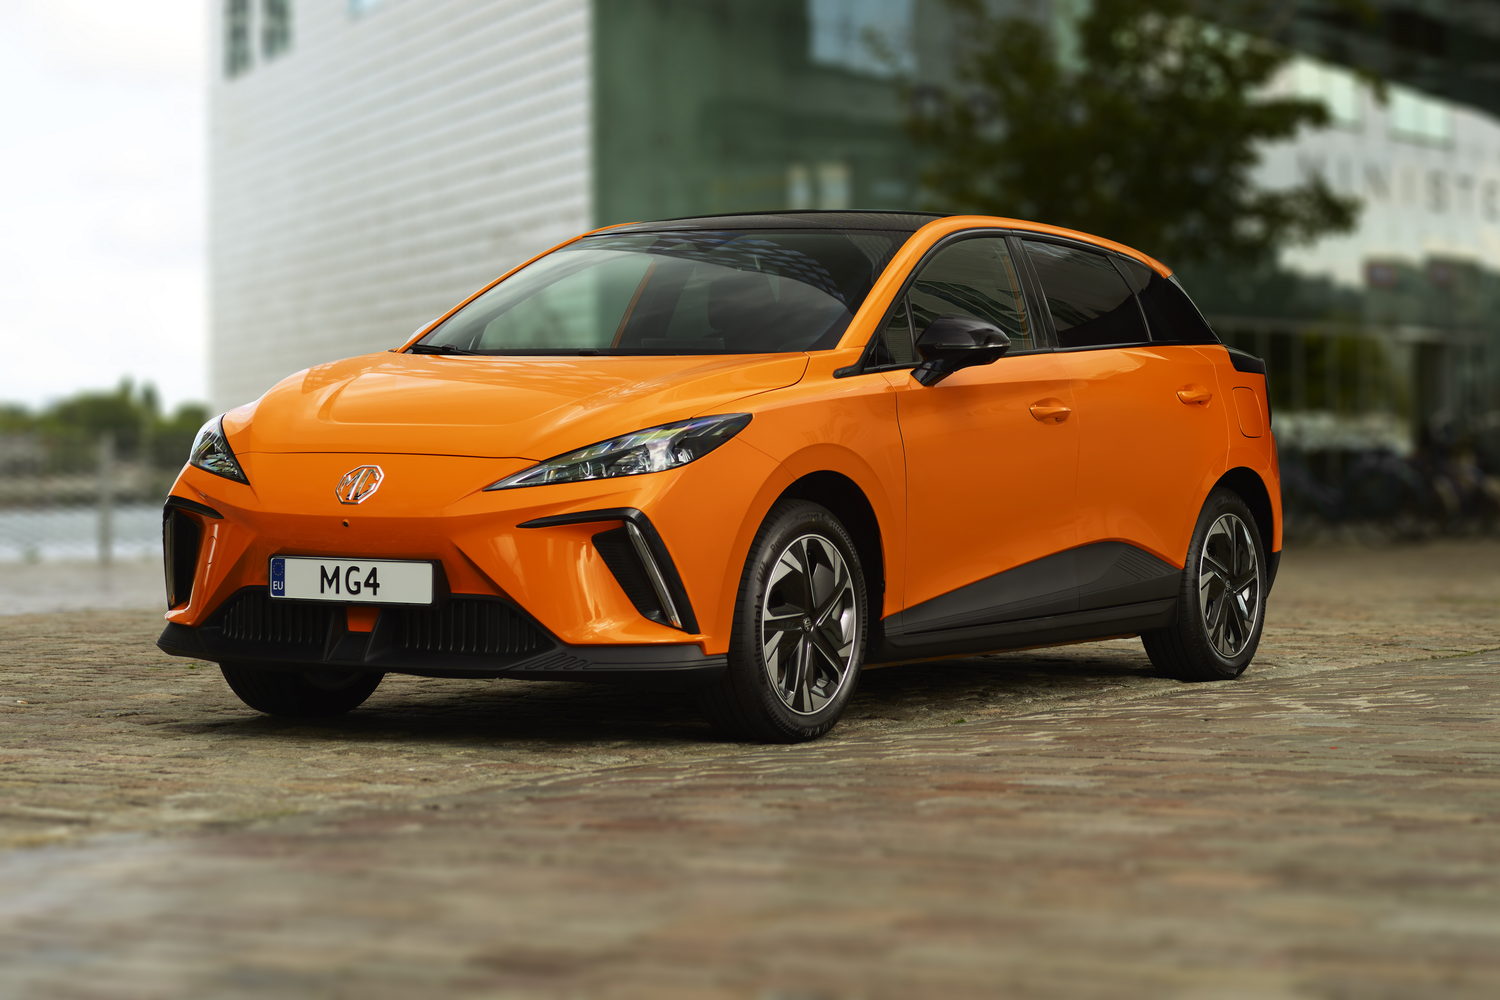 Car News | MG4 starts at €27,495 in Ireland | CompleteCar.ie